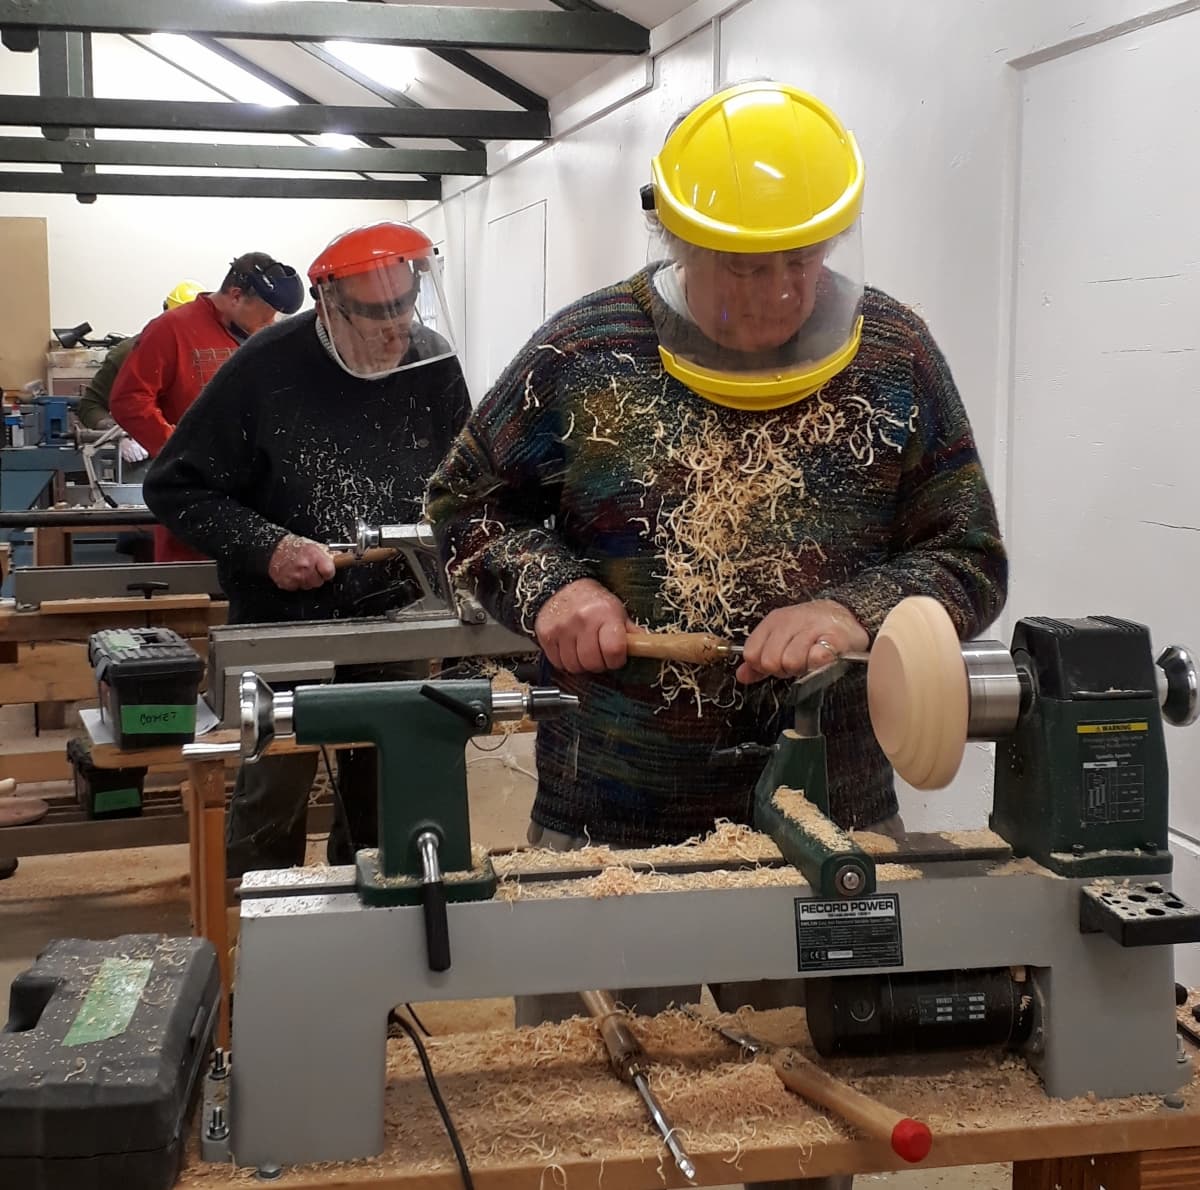 Wairarapa Woodworkers Guild are running courses again at their new home in the MTLT-owned former trout hatchery building next to Millennium Reserve